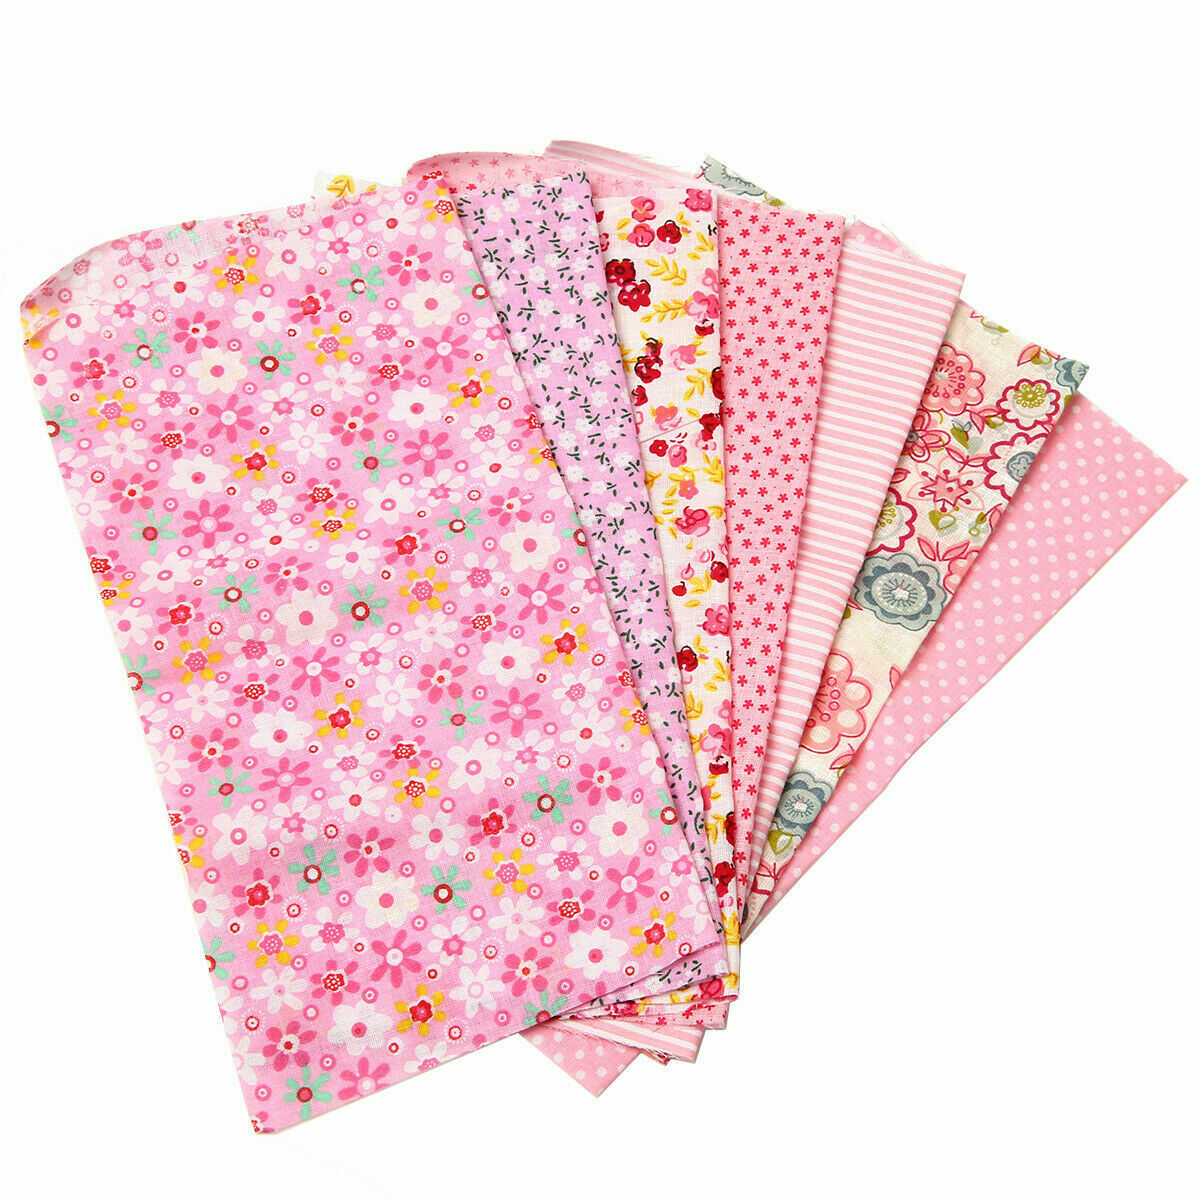 7PCS Pink Fabric Packages Patchwork Fabrics Fabrics Leftovers Patchwork Sewing C